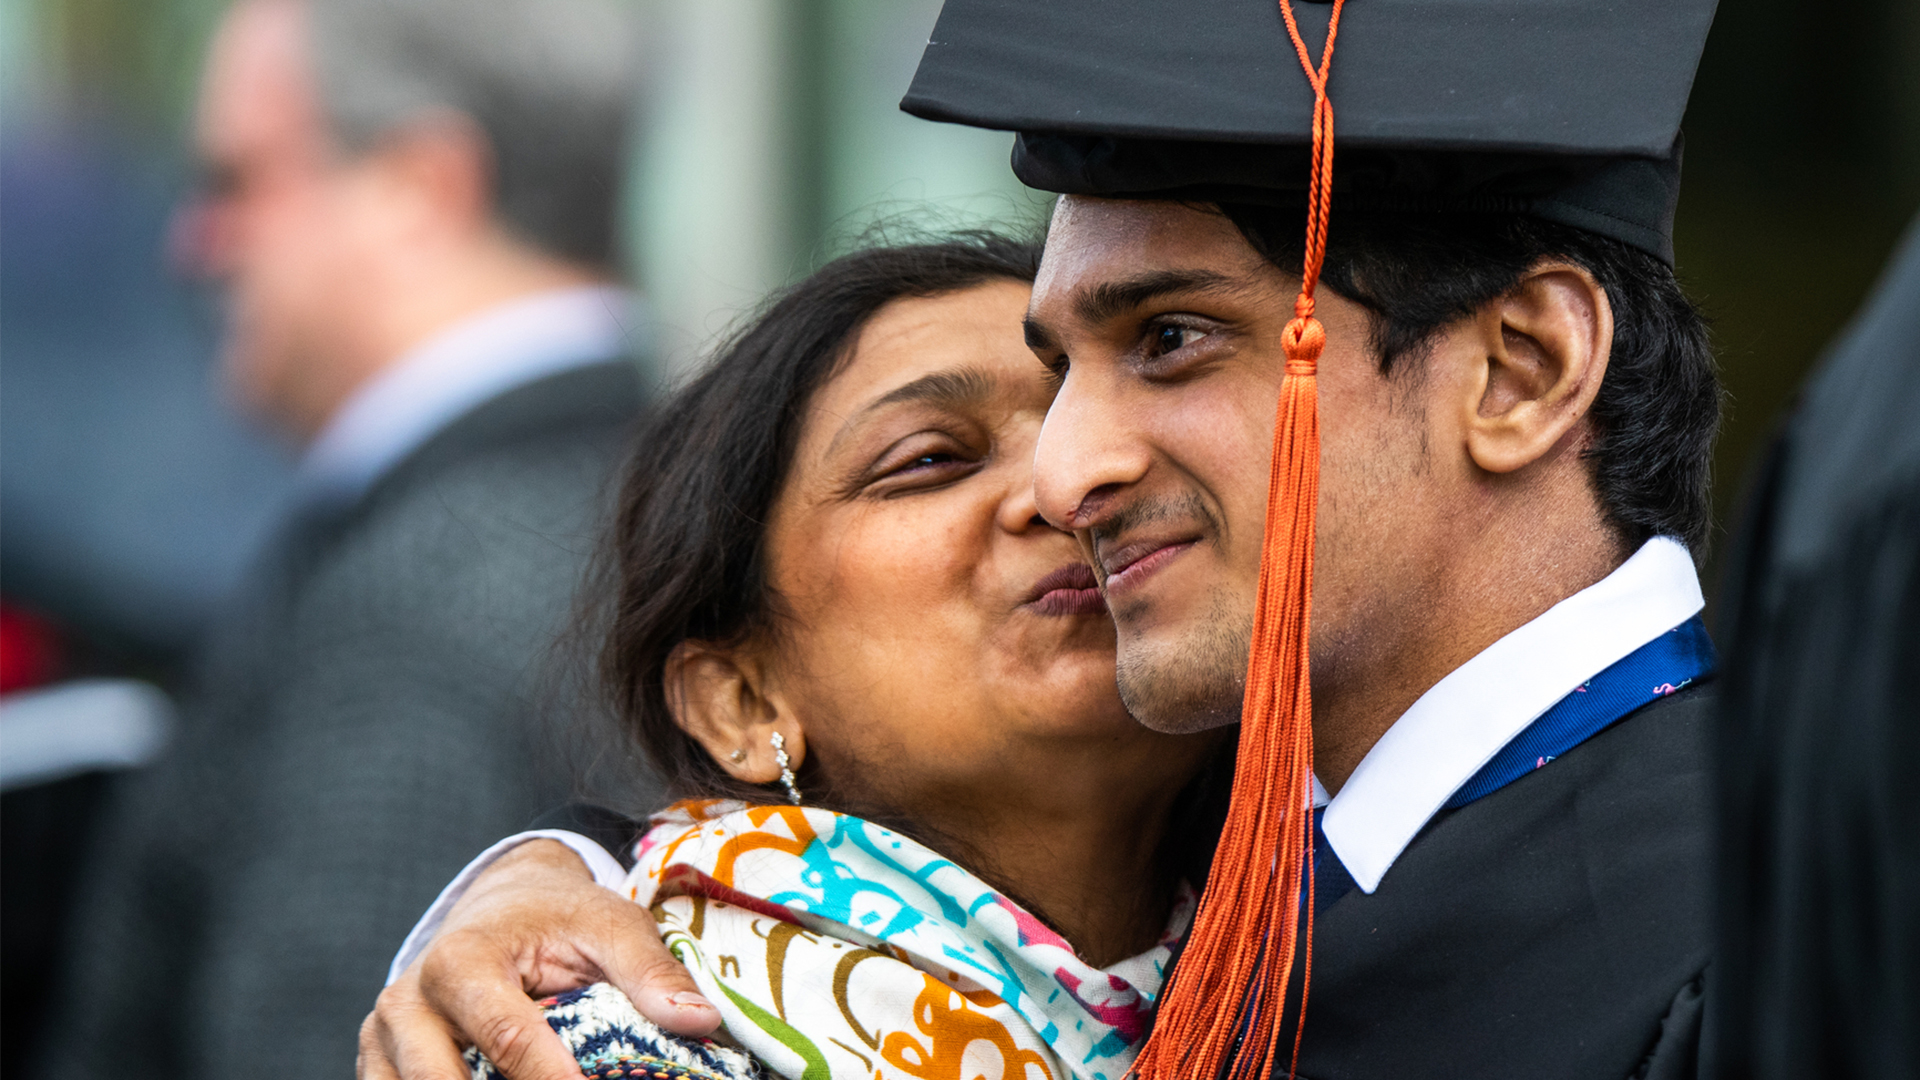 A mother kissing her son who is in his commencement robe and hat